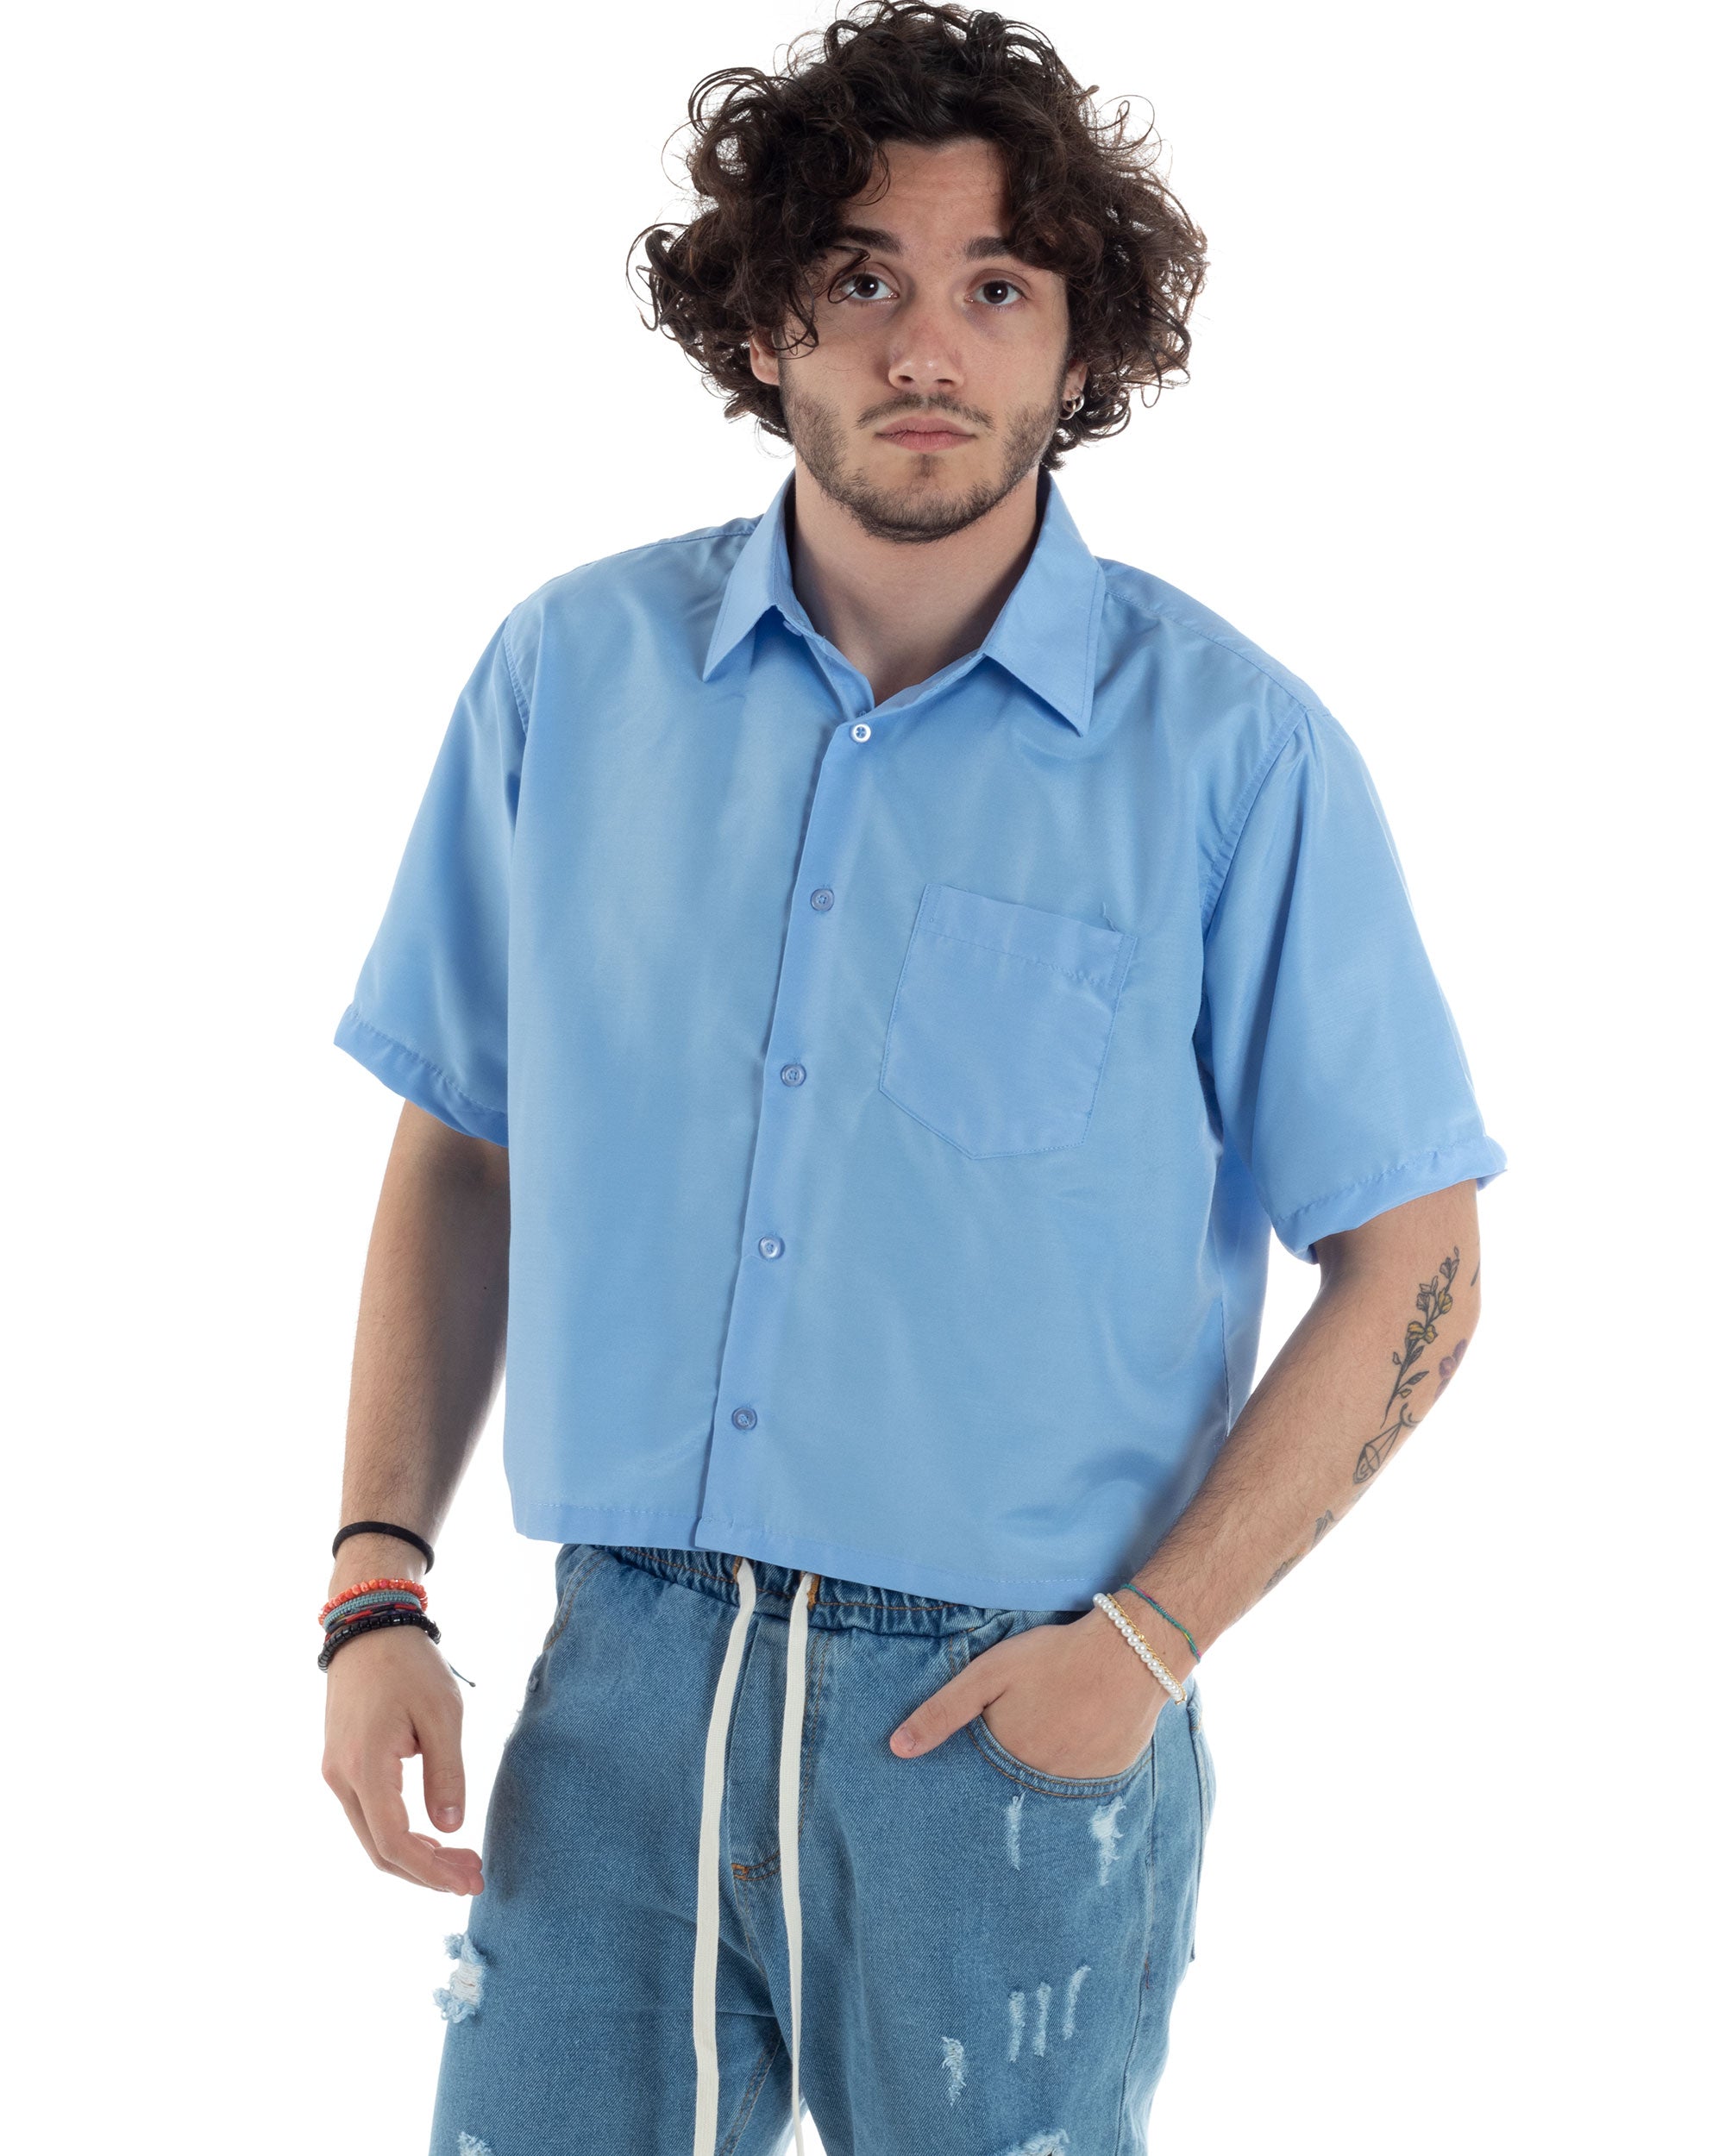 Men's Short Sleeve Cropped Shirt Solid Color Light Blue Boxy Fit Casual GIOSAL-CC1192A